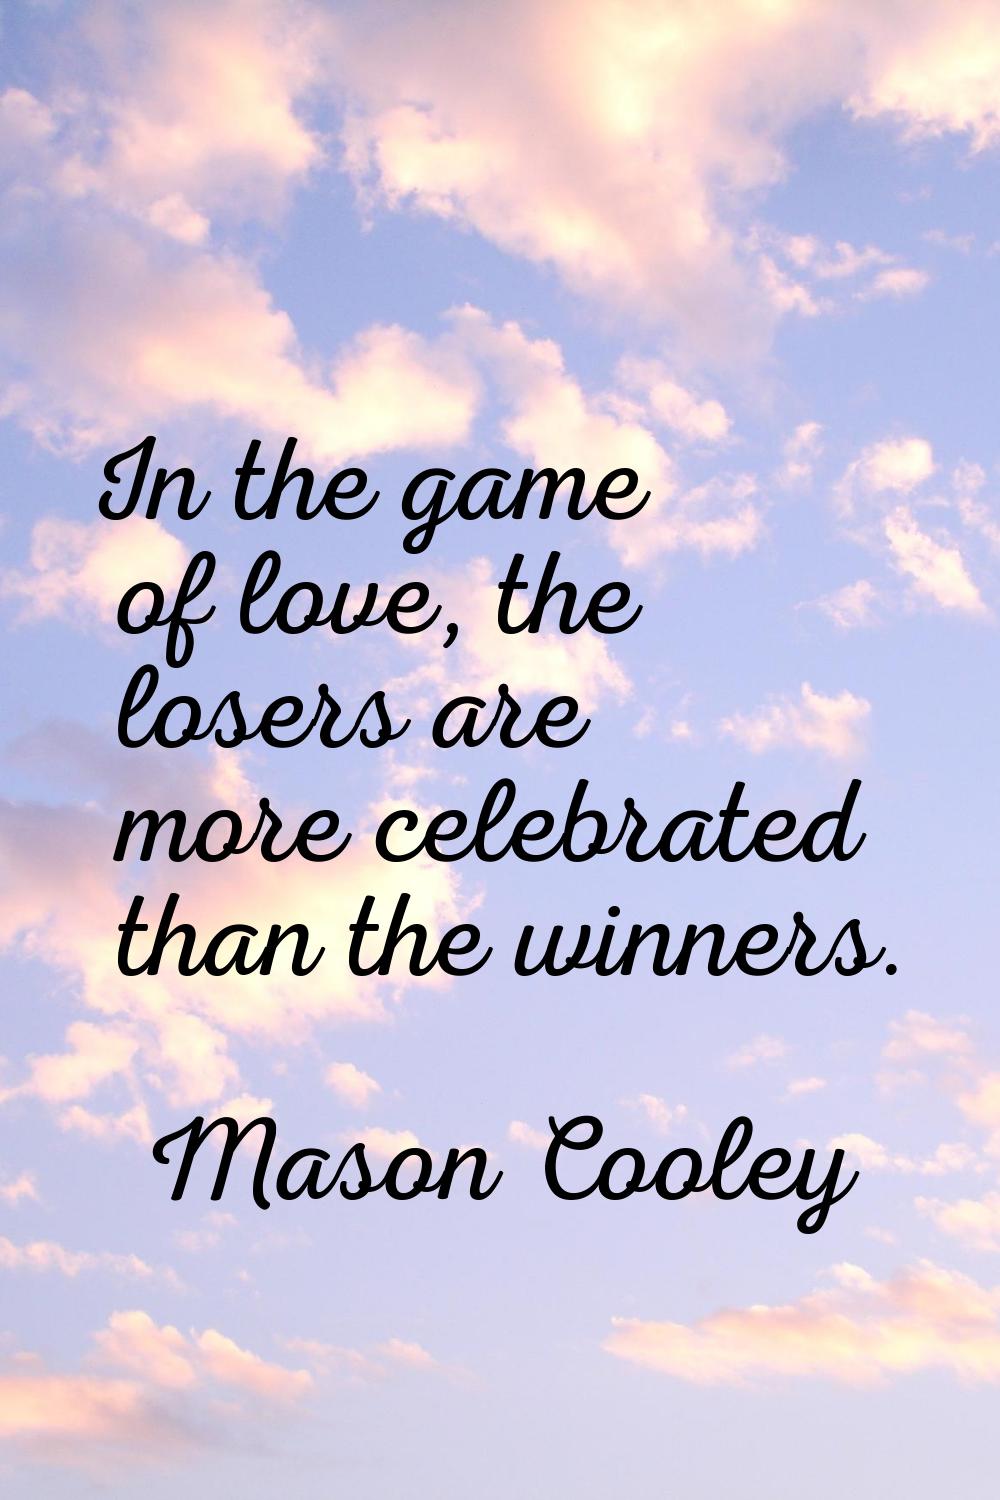 In the game of love, the losers are more celebrated than the winners.